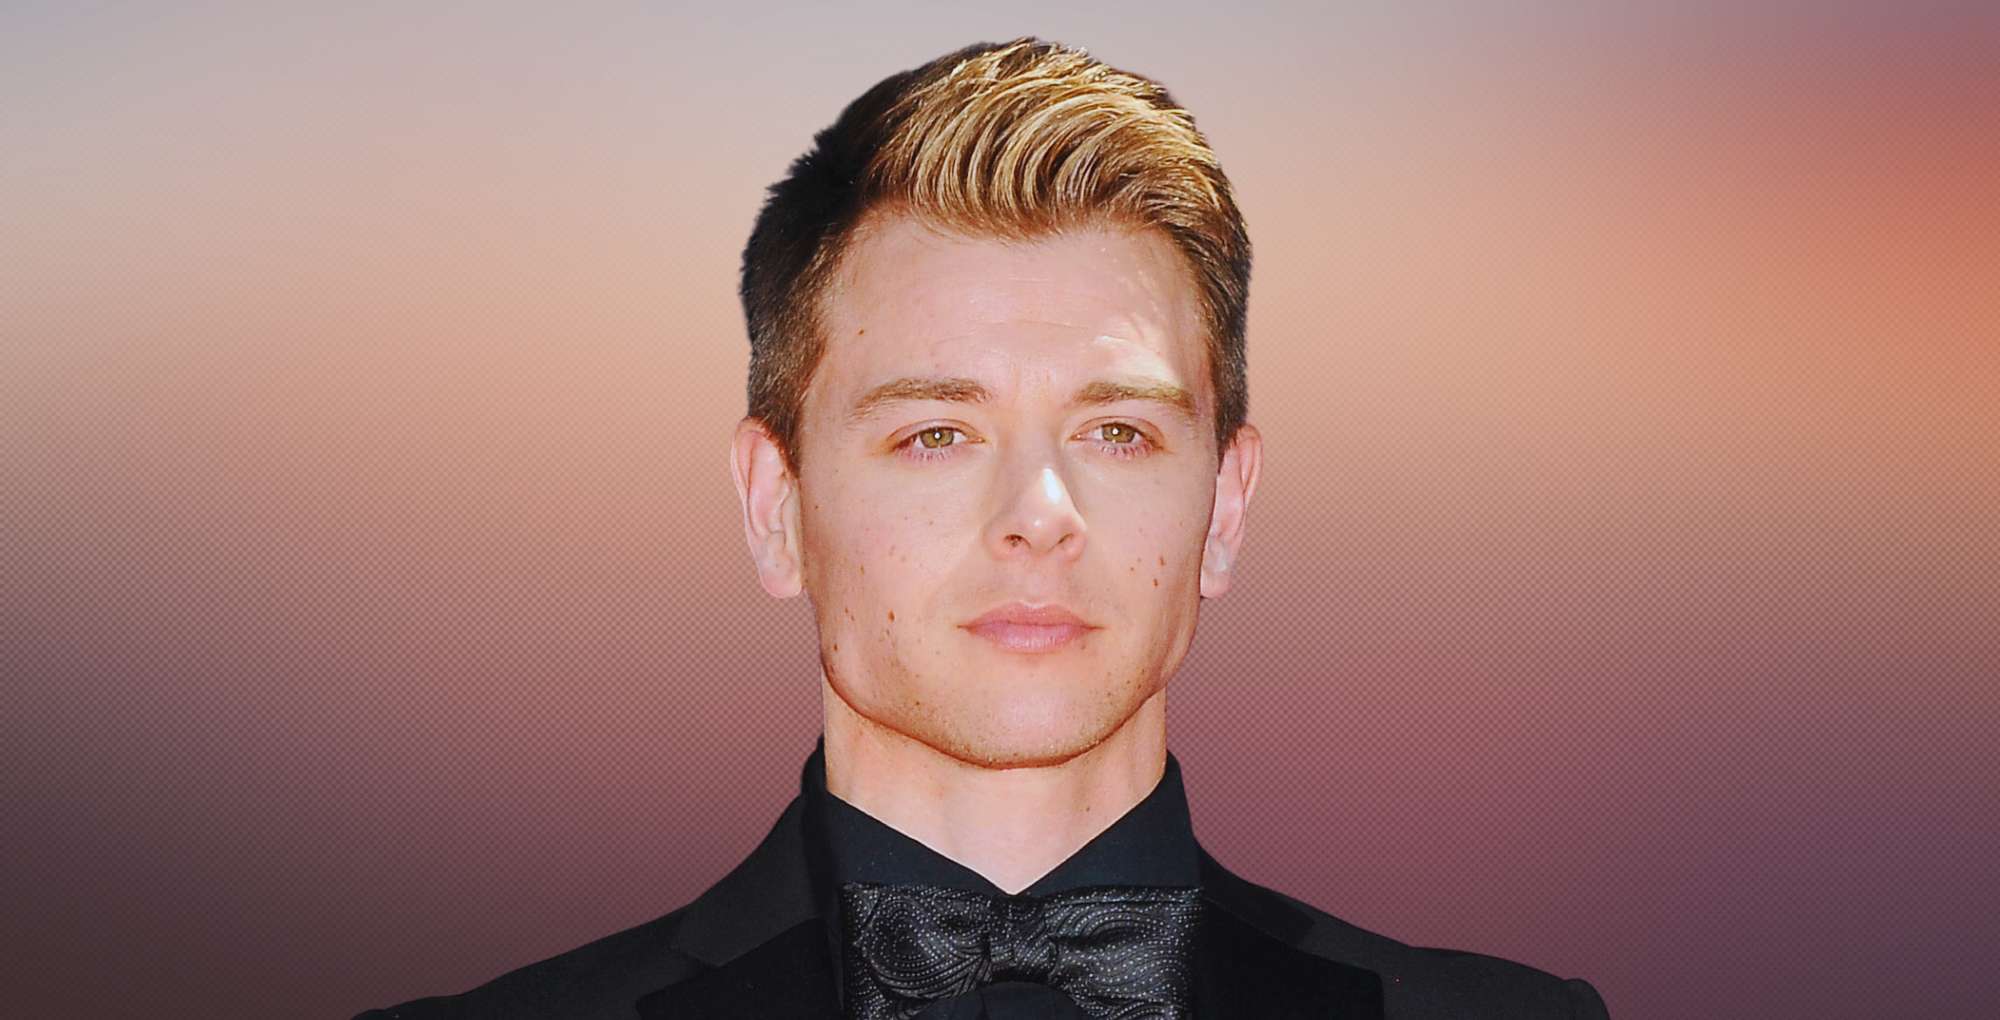 chad duell general hospital